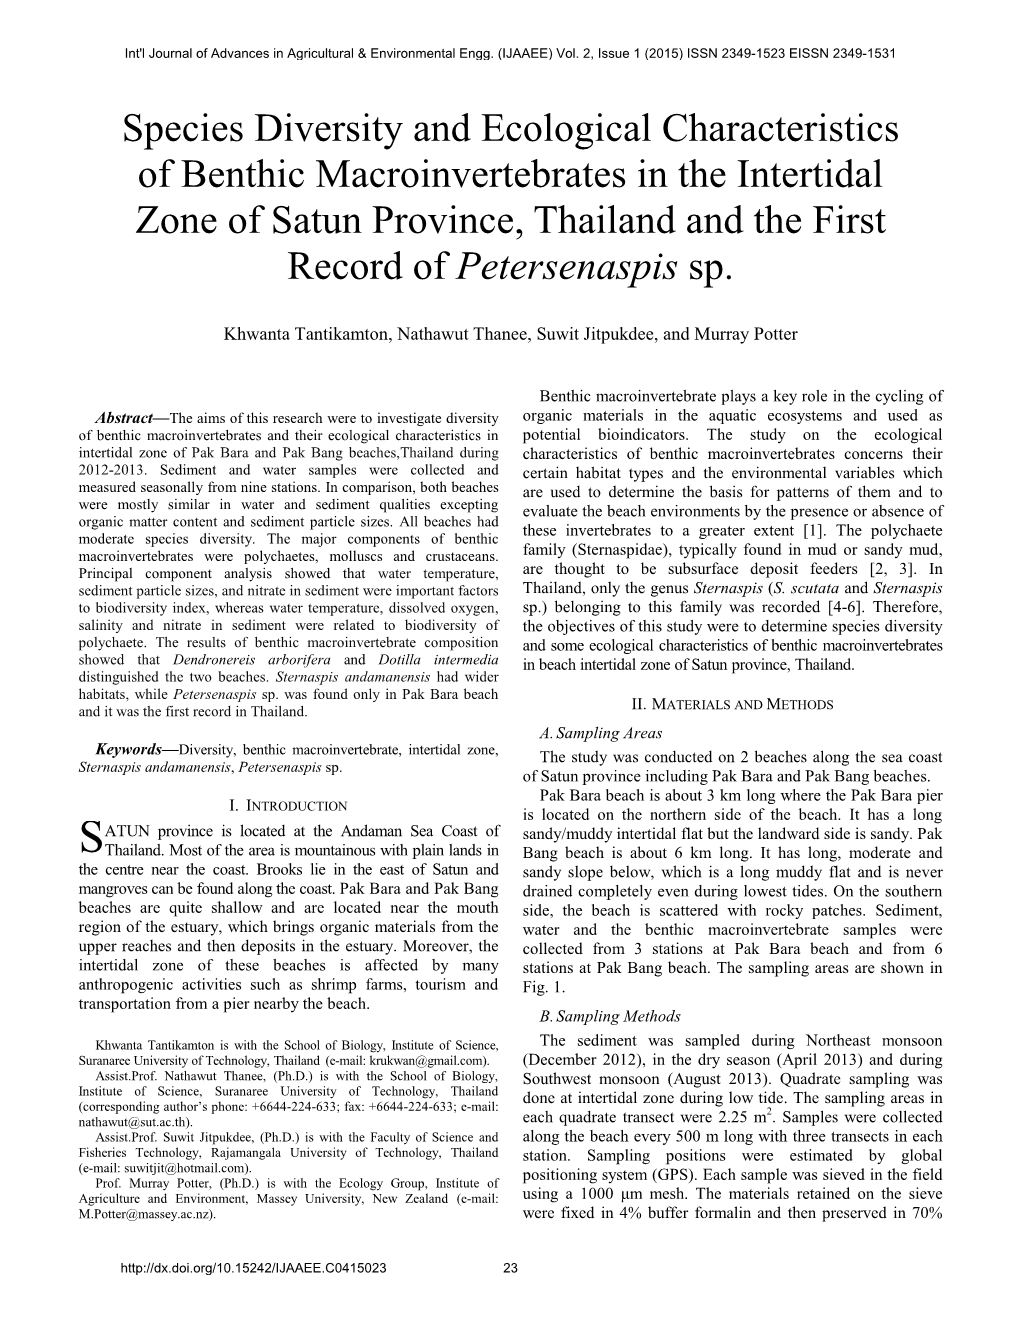 Species Diversity and Ecological Characteristics of Benthic